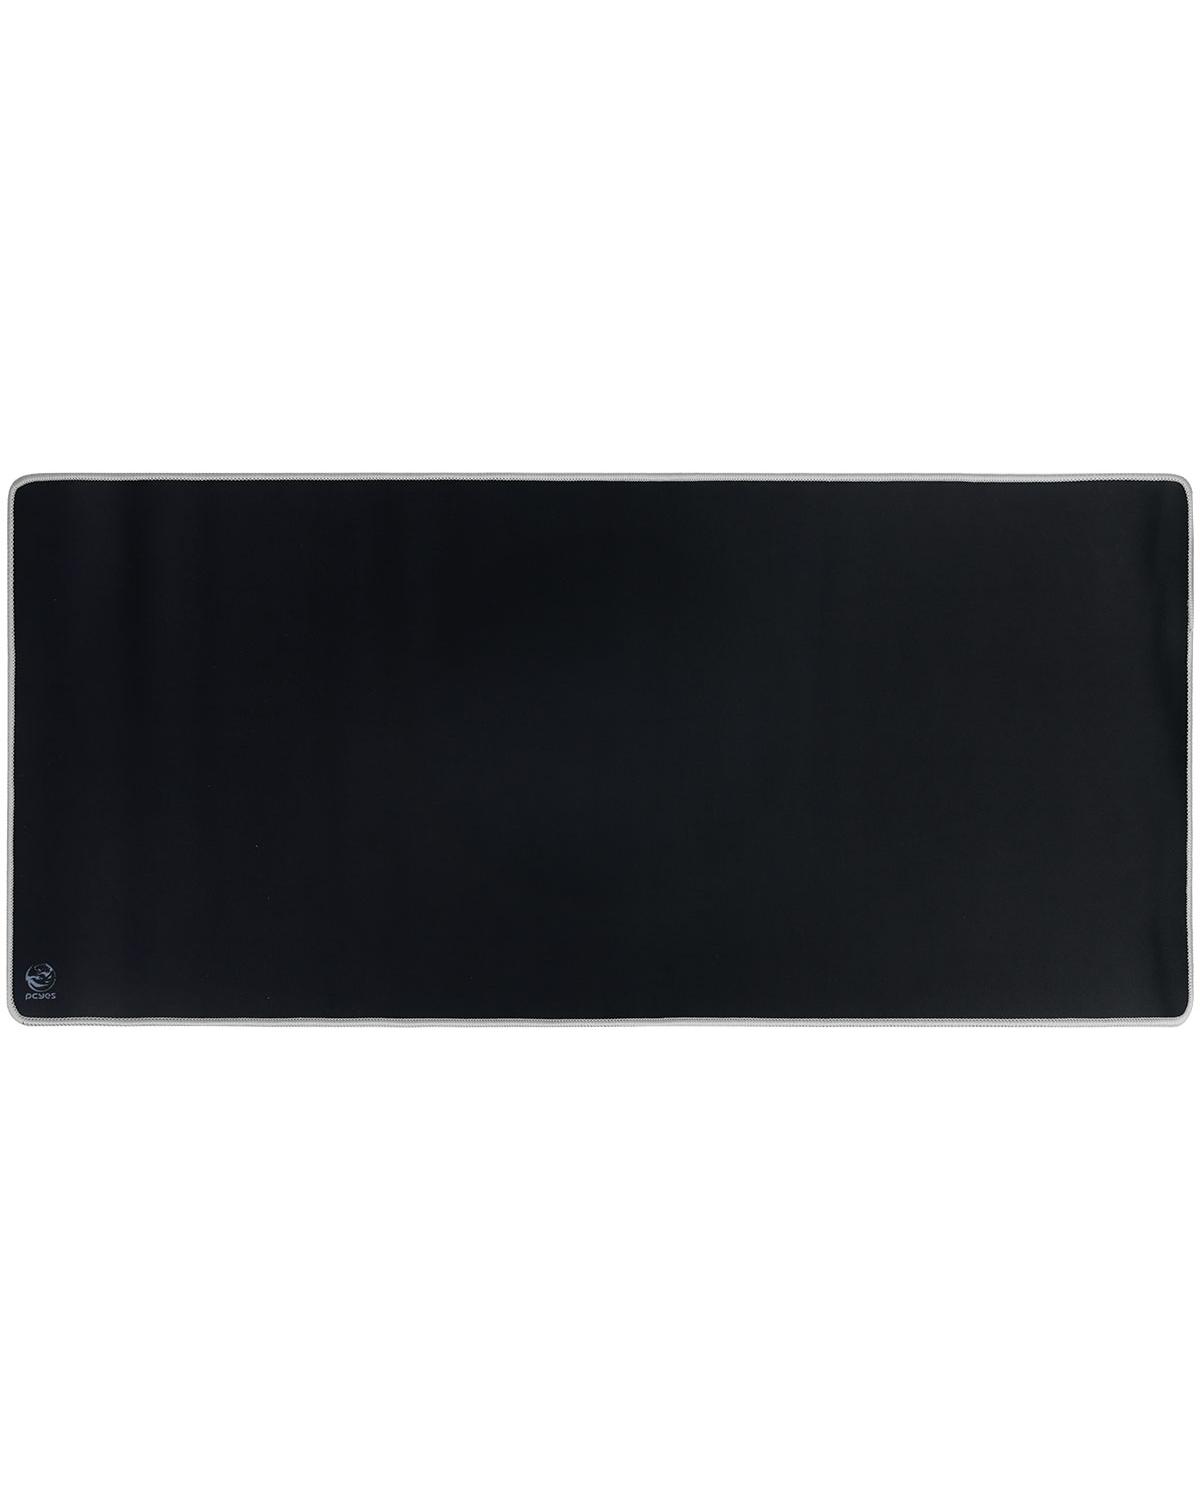 MOUSE PAD COLORS GRAY EXTENDED - ESTILO SPEED CINZA - 900X420MM - PMC90X42GY